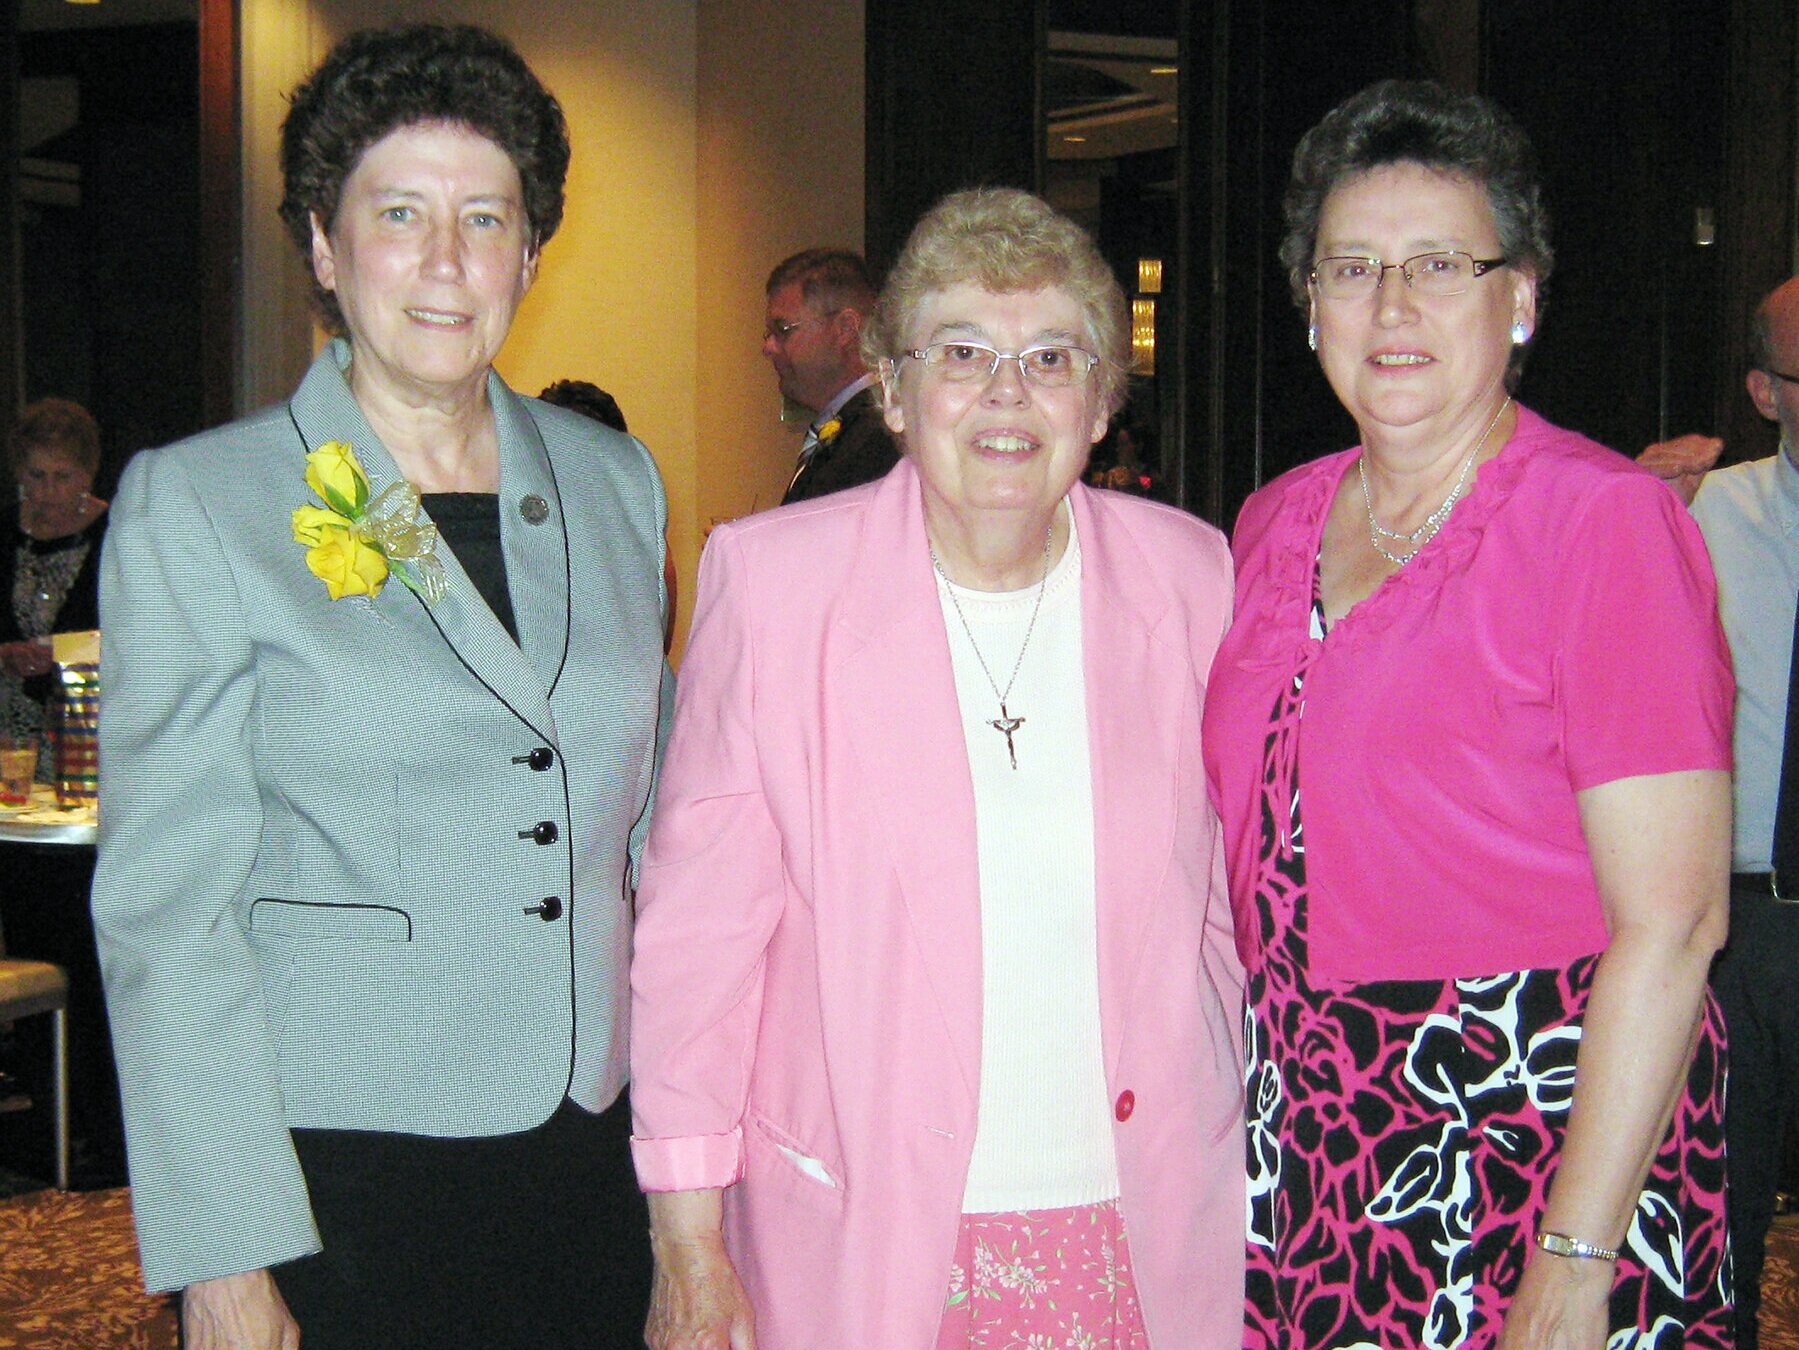  Sister Carol Ann Papp (left) with her fellow recipients of the Diocese of Pittsburgh Golden Apple Award in 2014. 